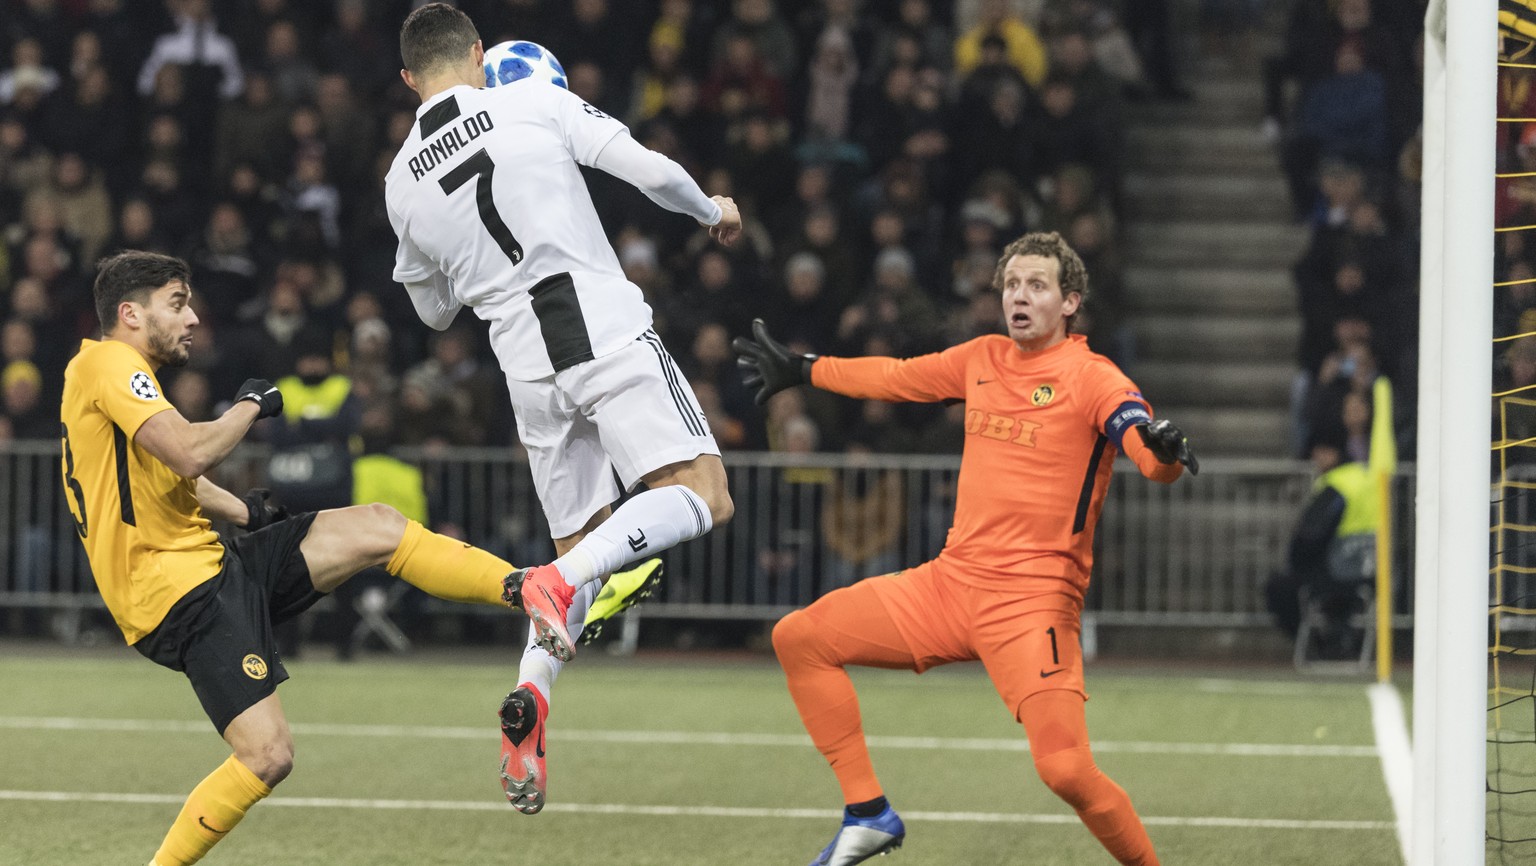 Juventus&#039; Cristiano Ronaldo, center, tries a header against Young Boys&#039; goalkeeper Marco Woelfli and Loris Benito, during the UEFA Champions League group stage group H matchday 6 soccer matc ...